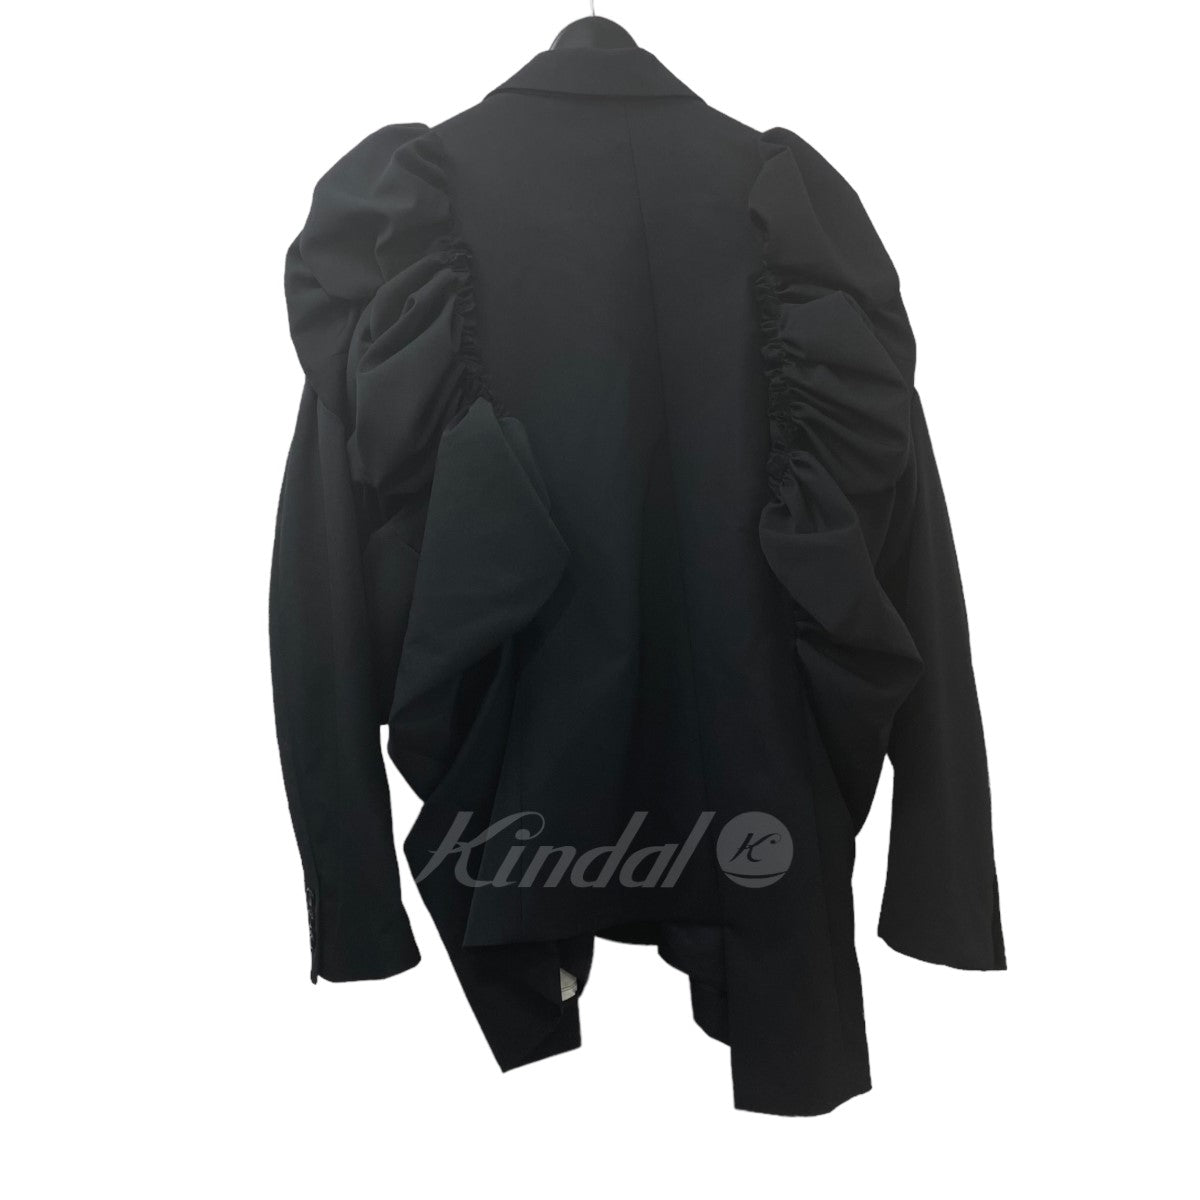 COMME des GARCONS(コムデギャルソン) 23SS Asynmetrical Jacket ...